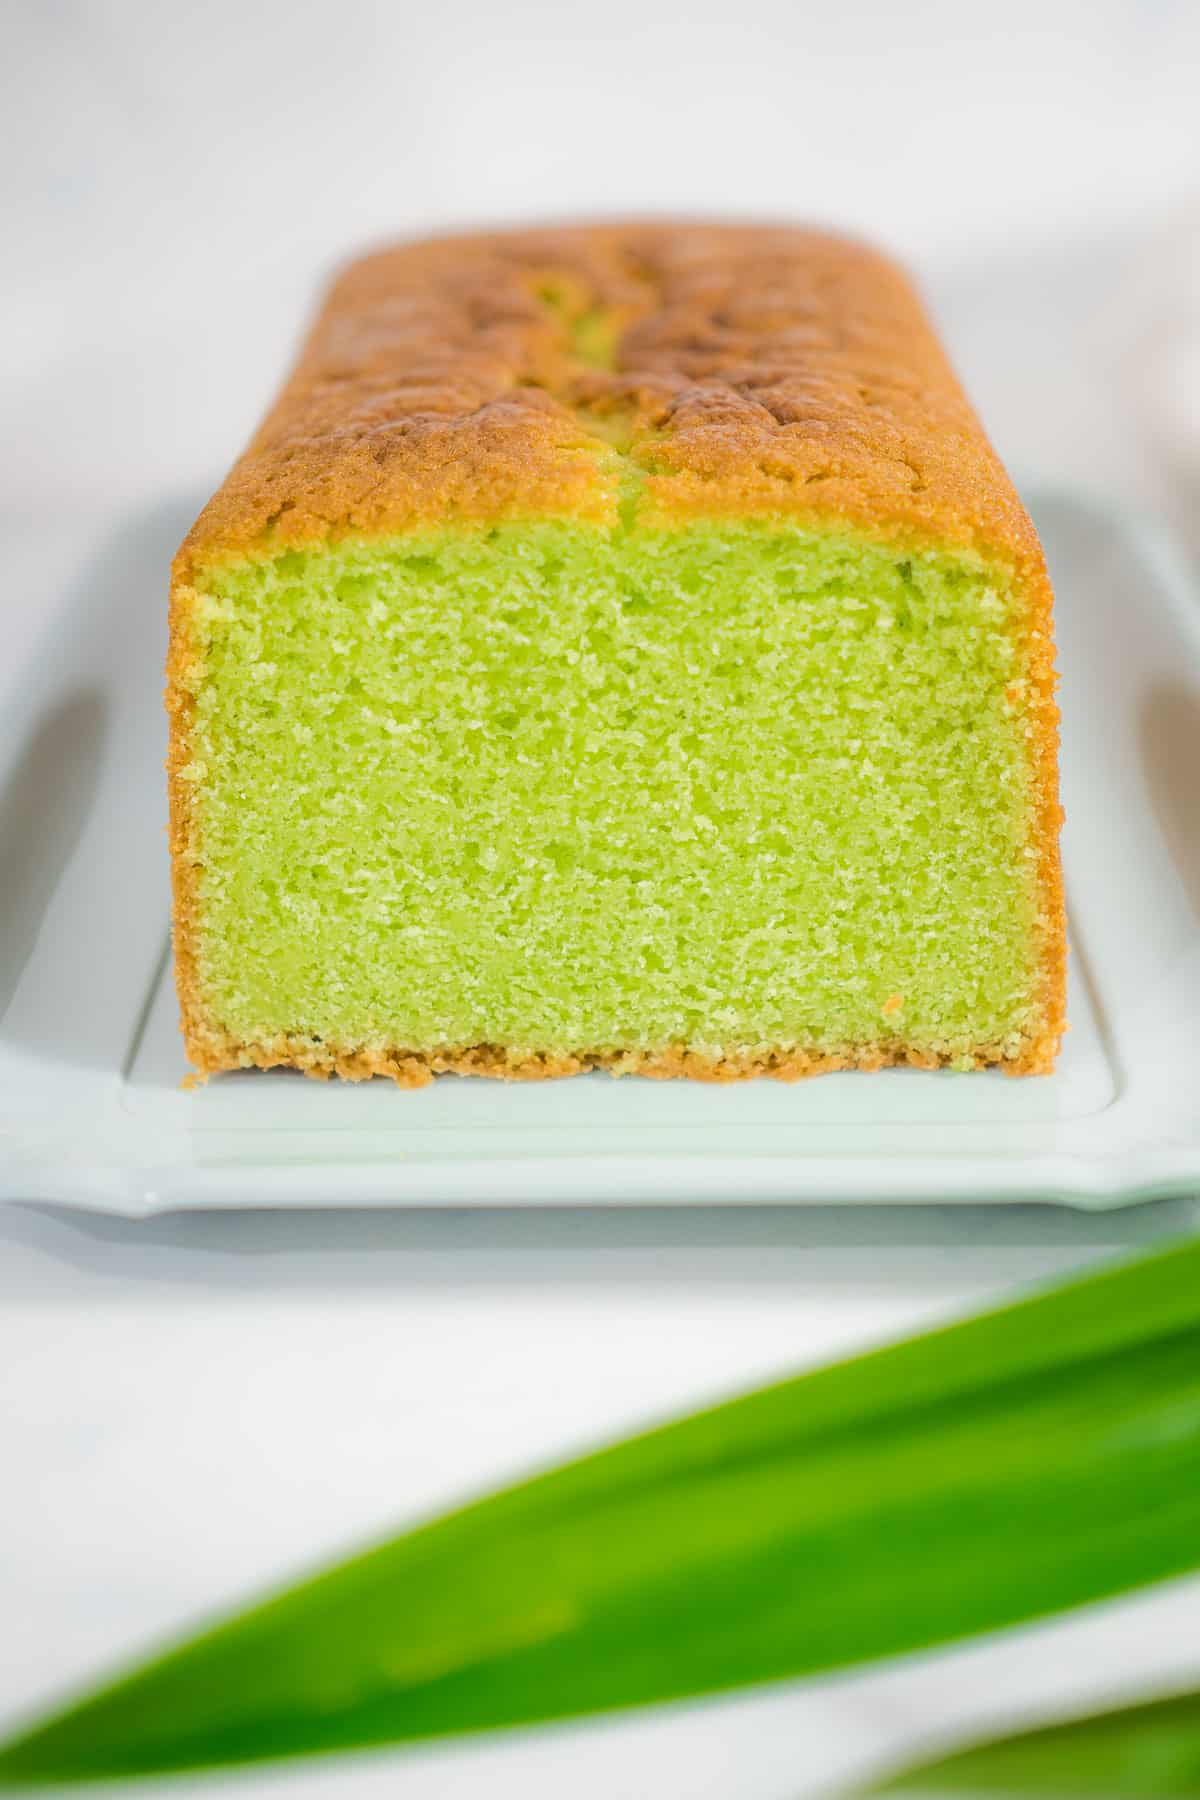 Front view of a cut cake loaf.